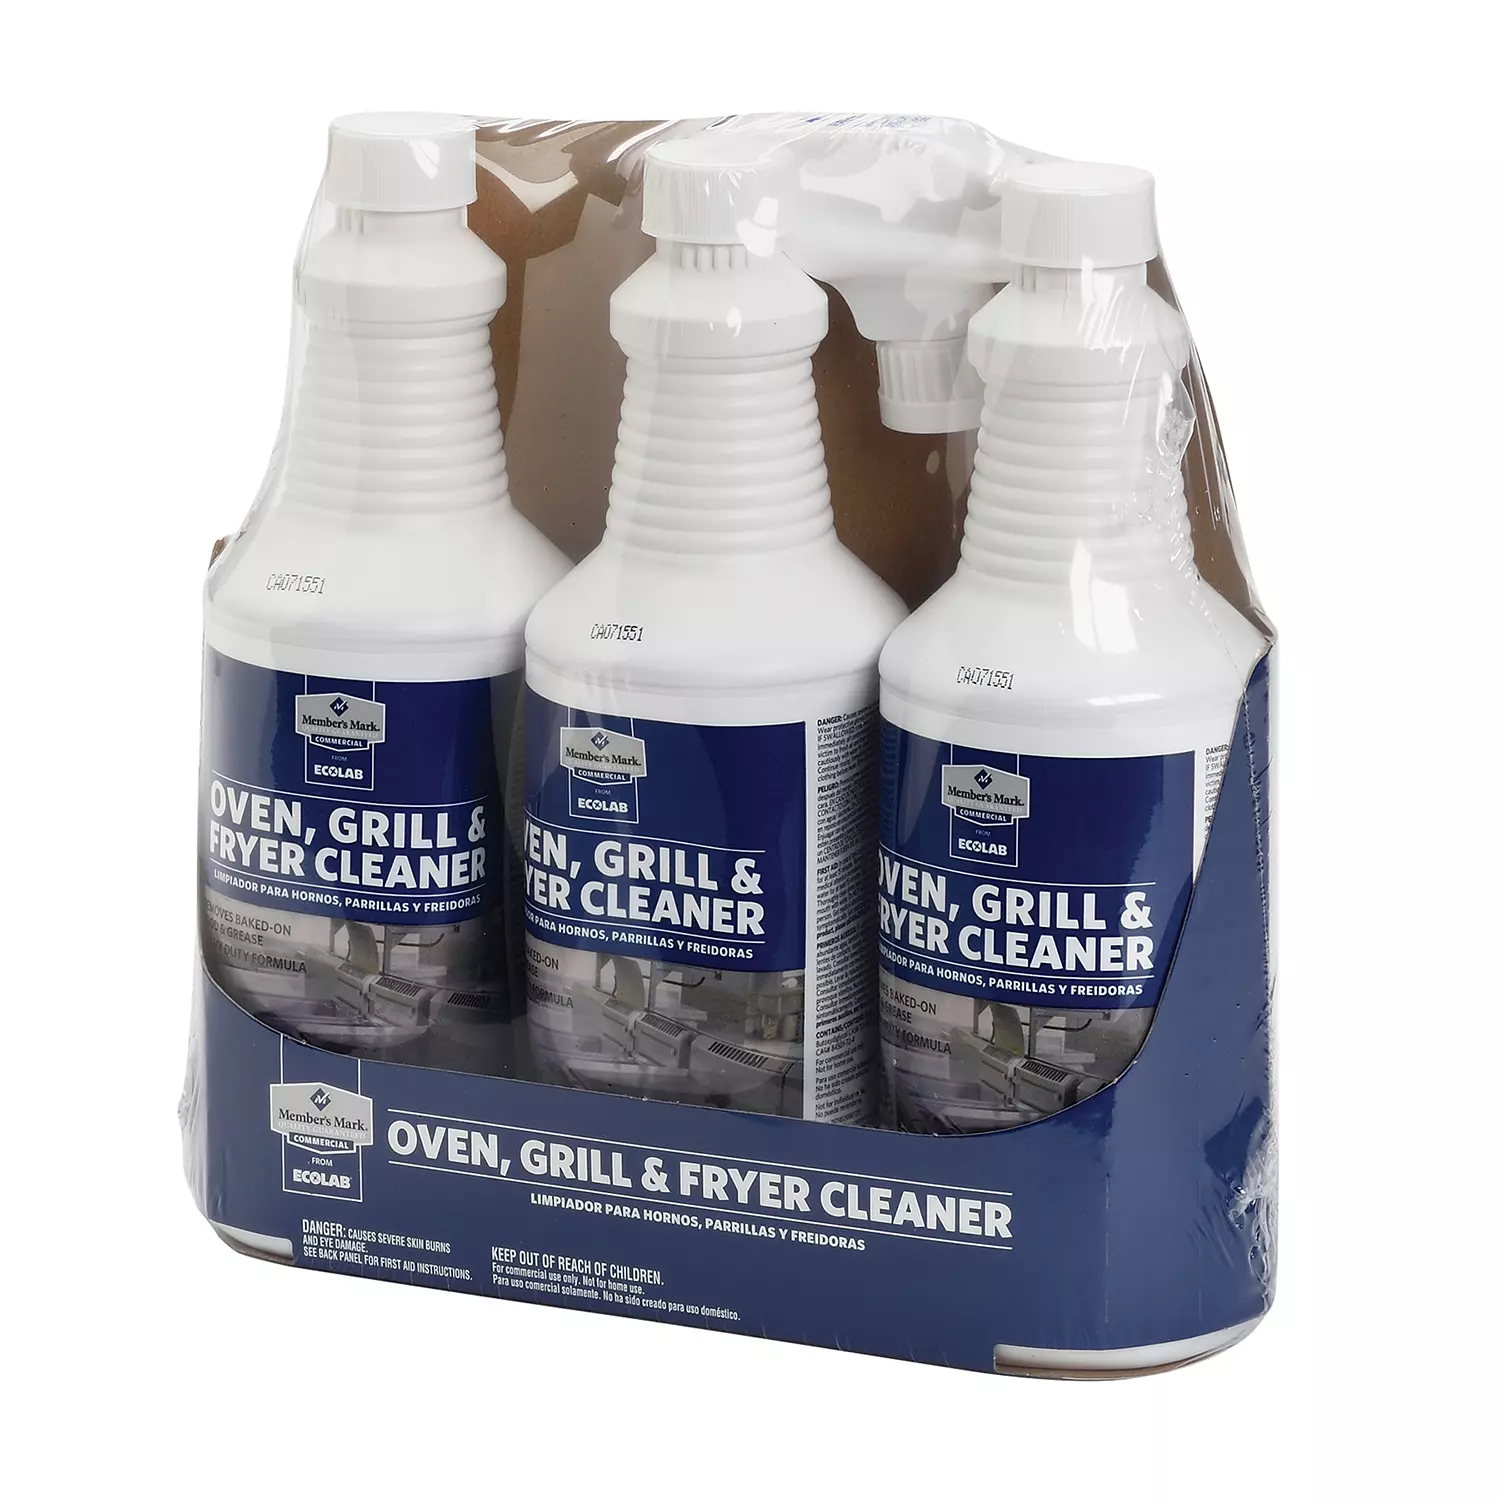 Member’s Mark Commercial Oven, Grill and Fryer Cleaner (32 oz., 3 pk.)